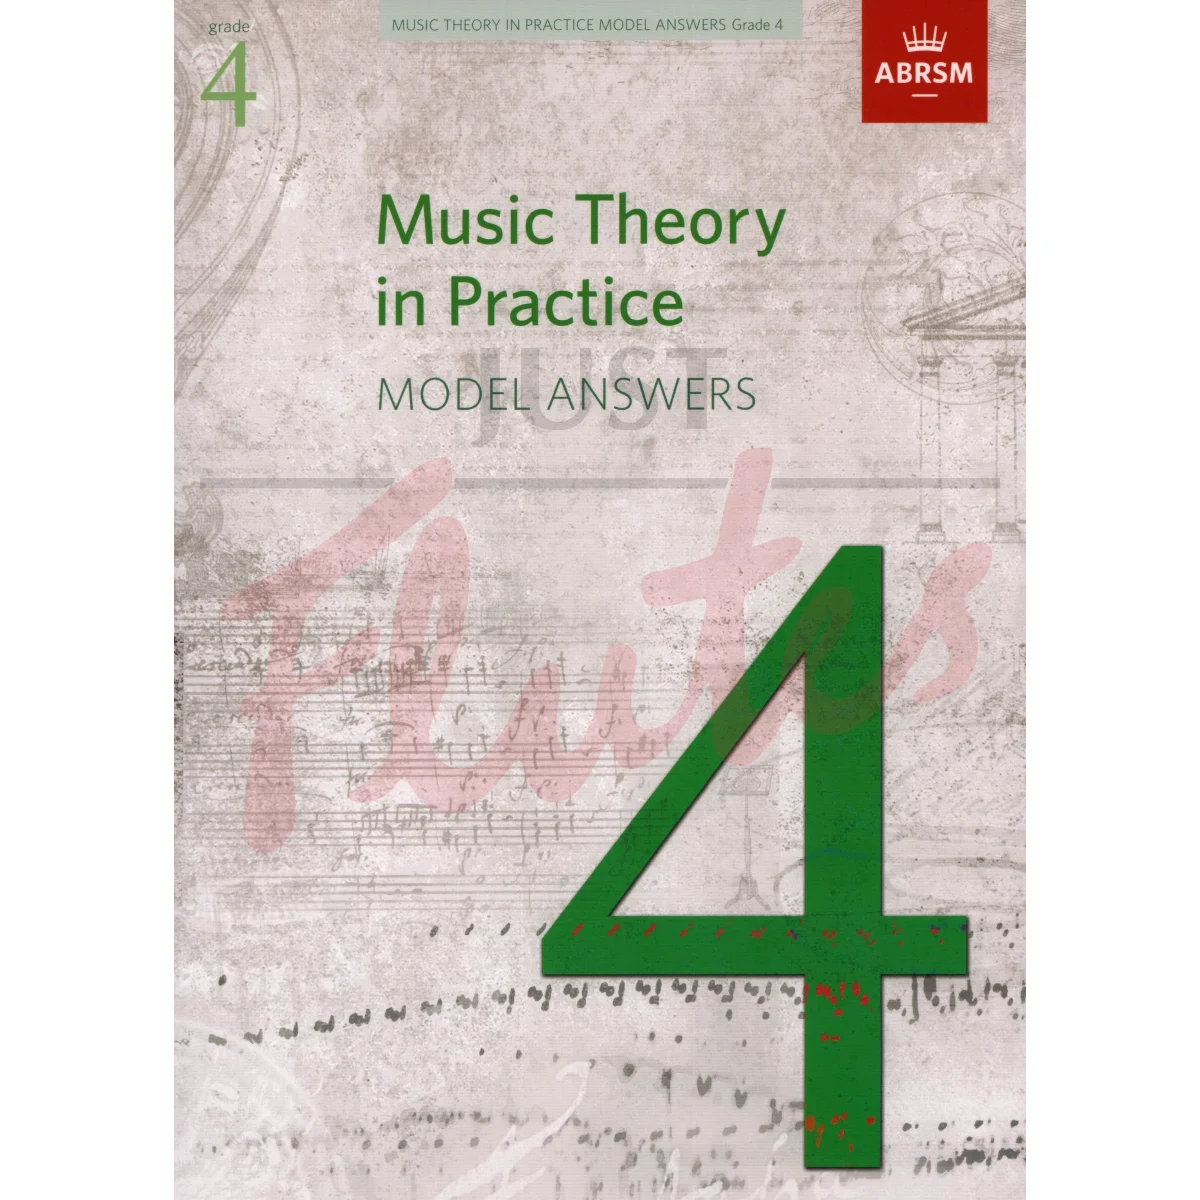 Music Theory in Practice Model Answers - Grade 4